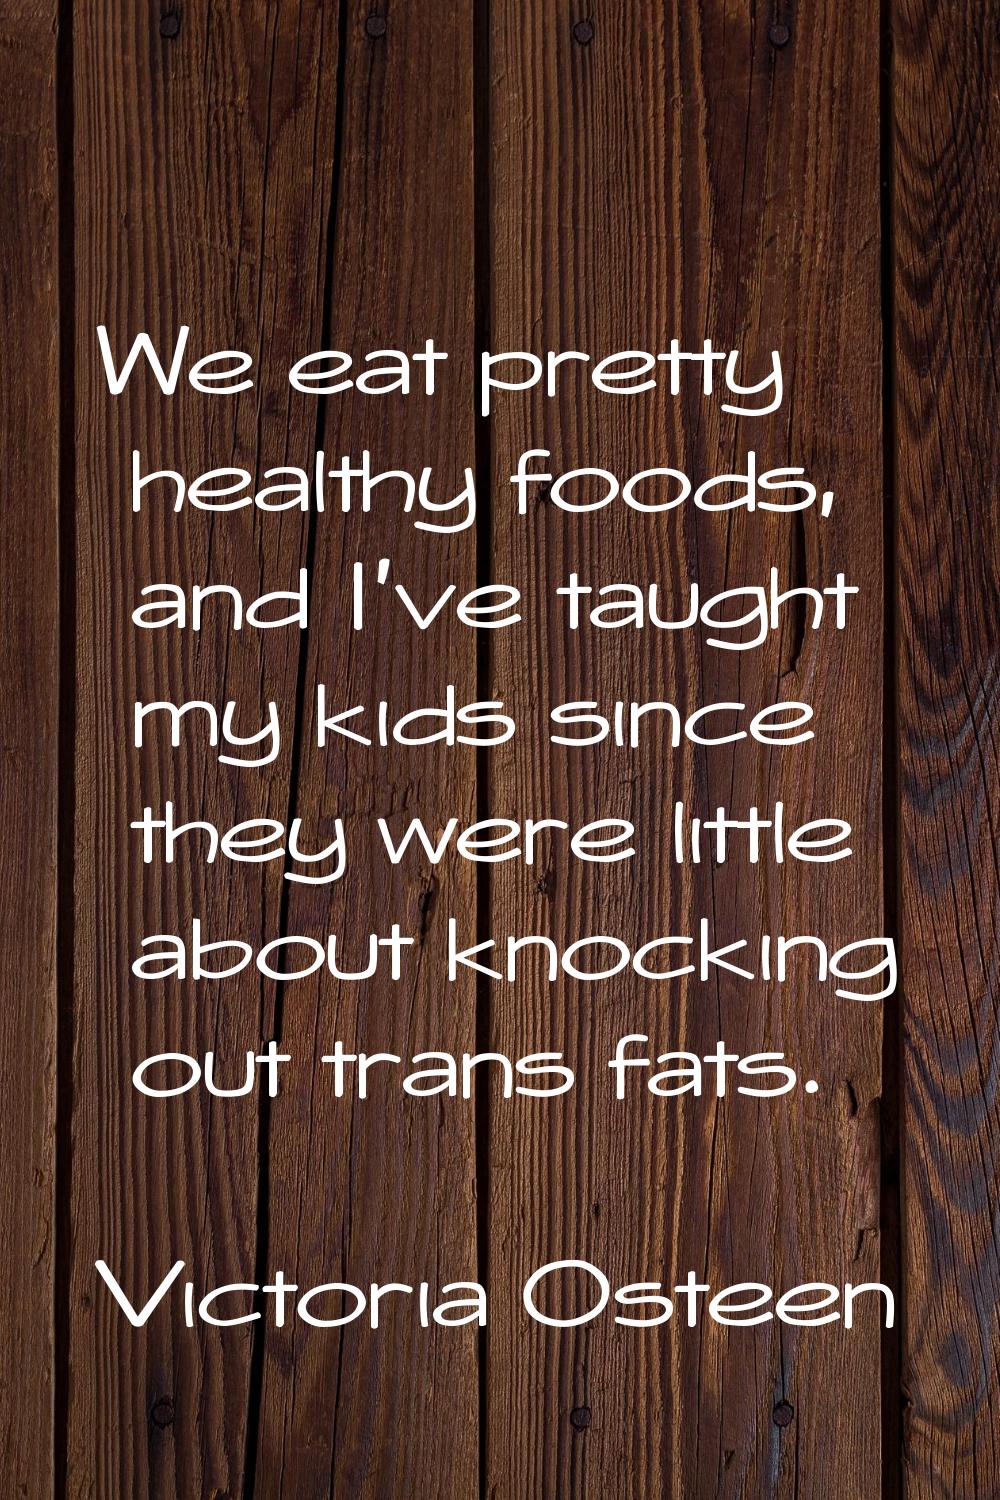 We eat pretty healthy foods, and I've taught my kids since they were little about knocking out tran